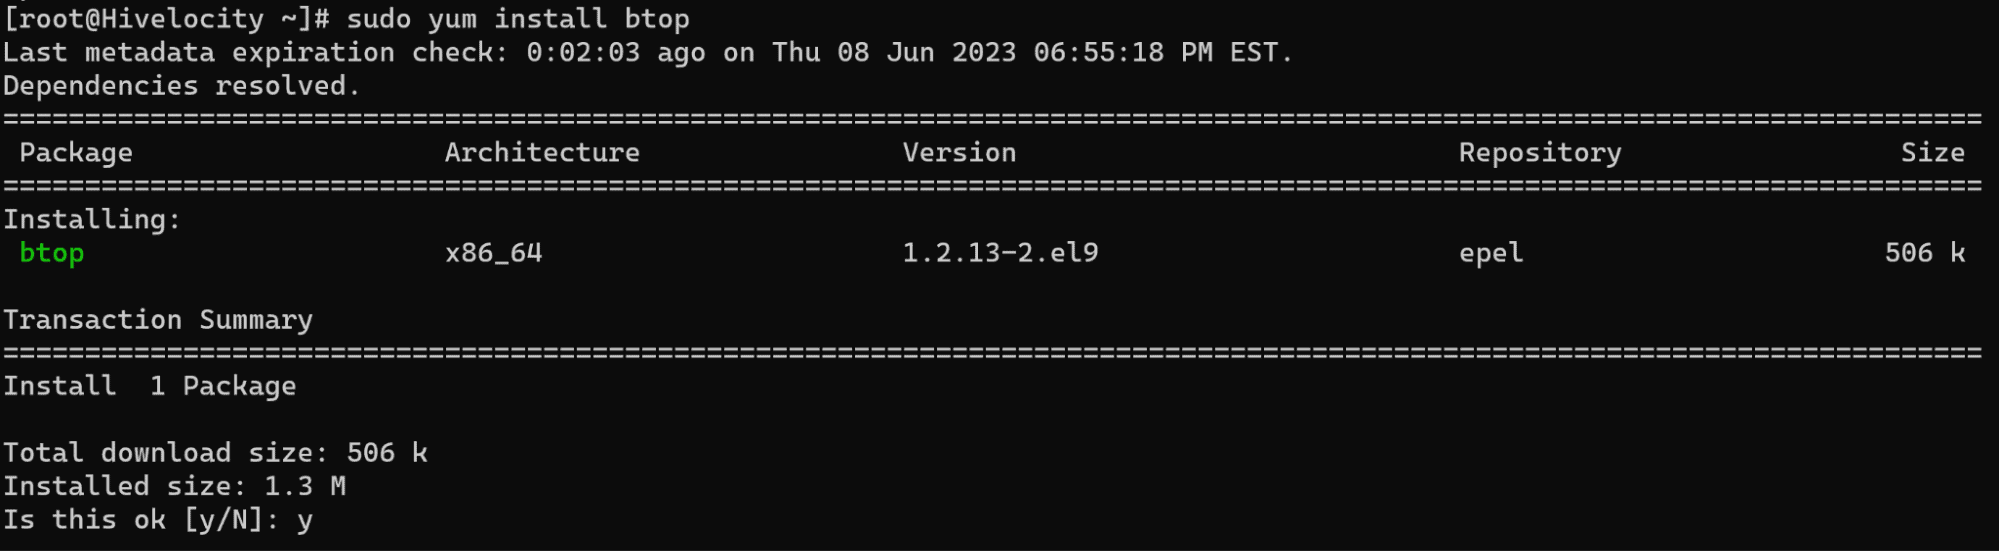 Screenshot showing the results of the command: sudo yum install btop